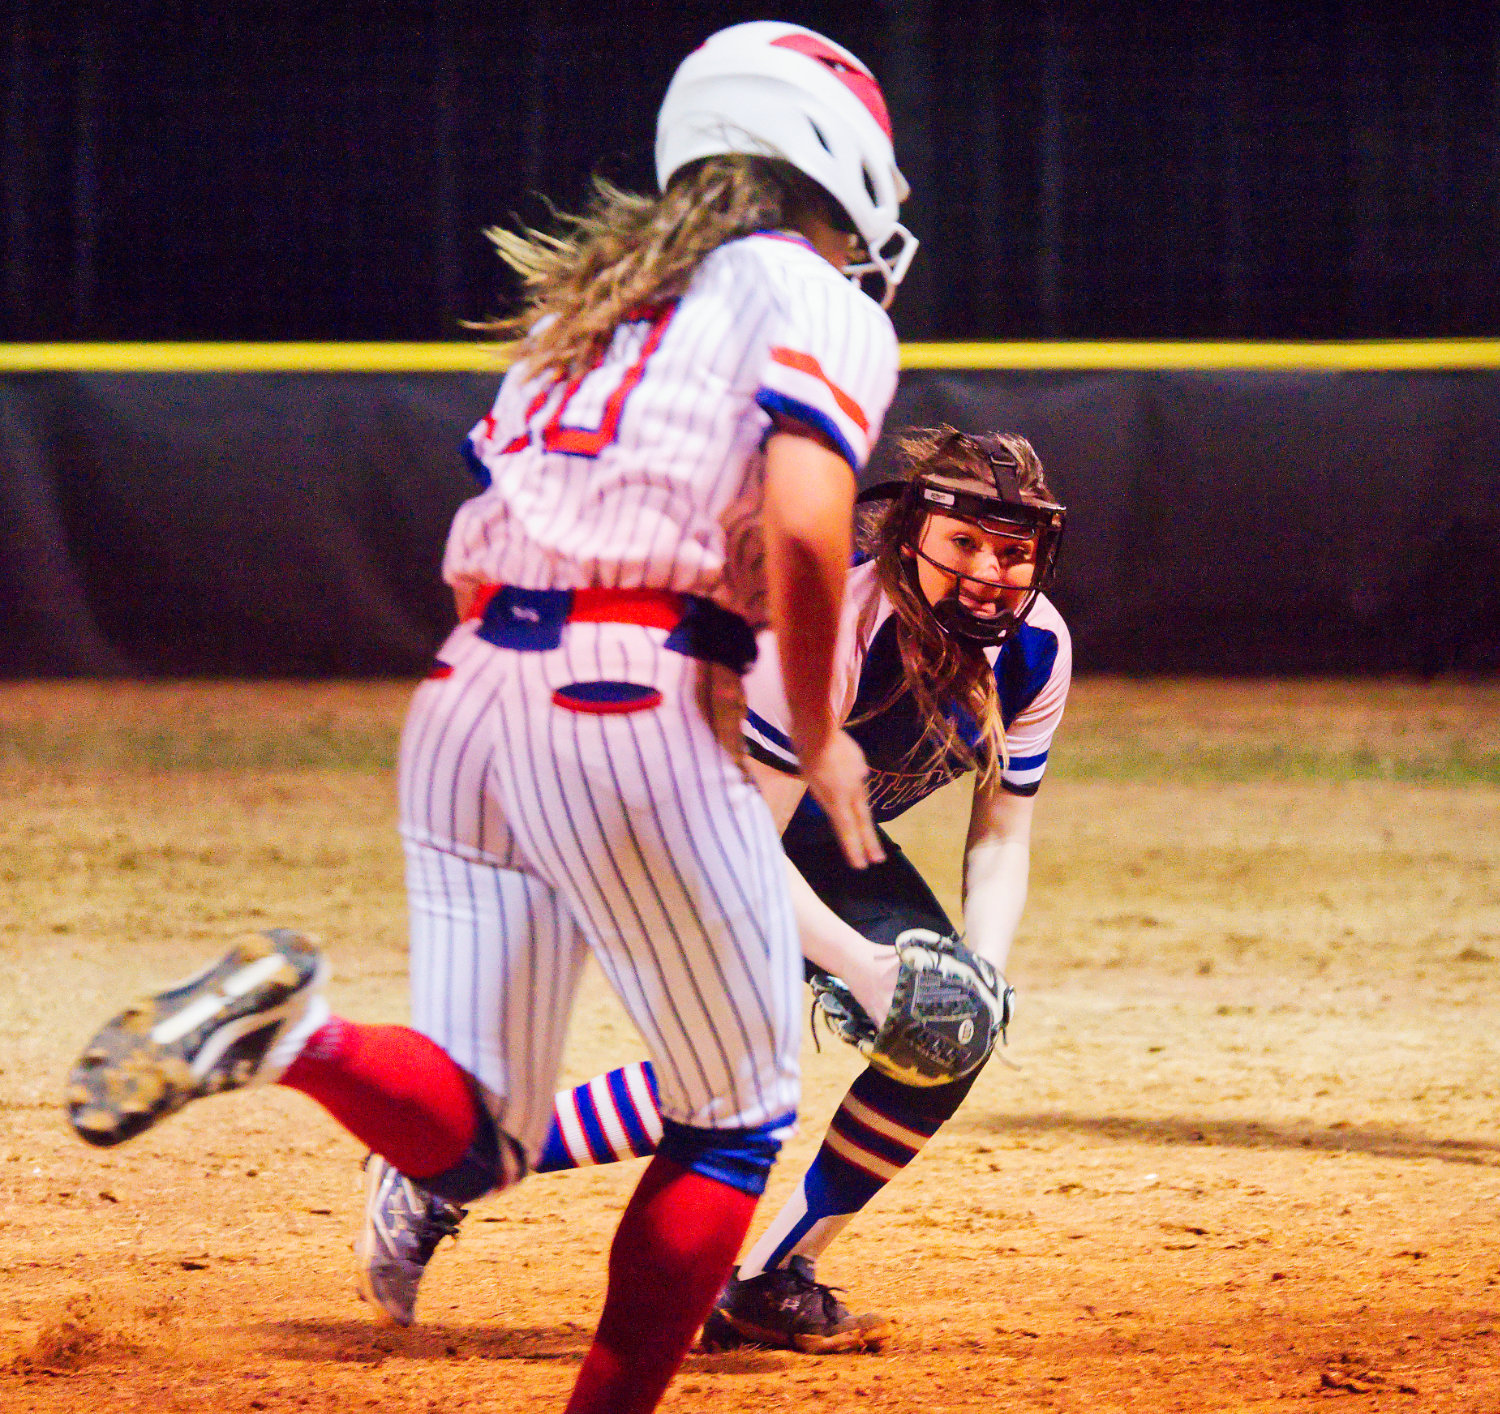 Alexis O’Neal of Quitman puts the tag on Erin Langston of Alba-Golden on a grounder in last week’s intra-county softball match-up. [pitcher pictures & more]